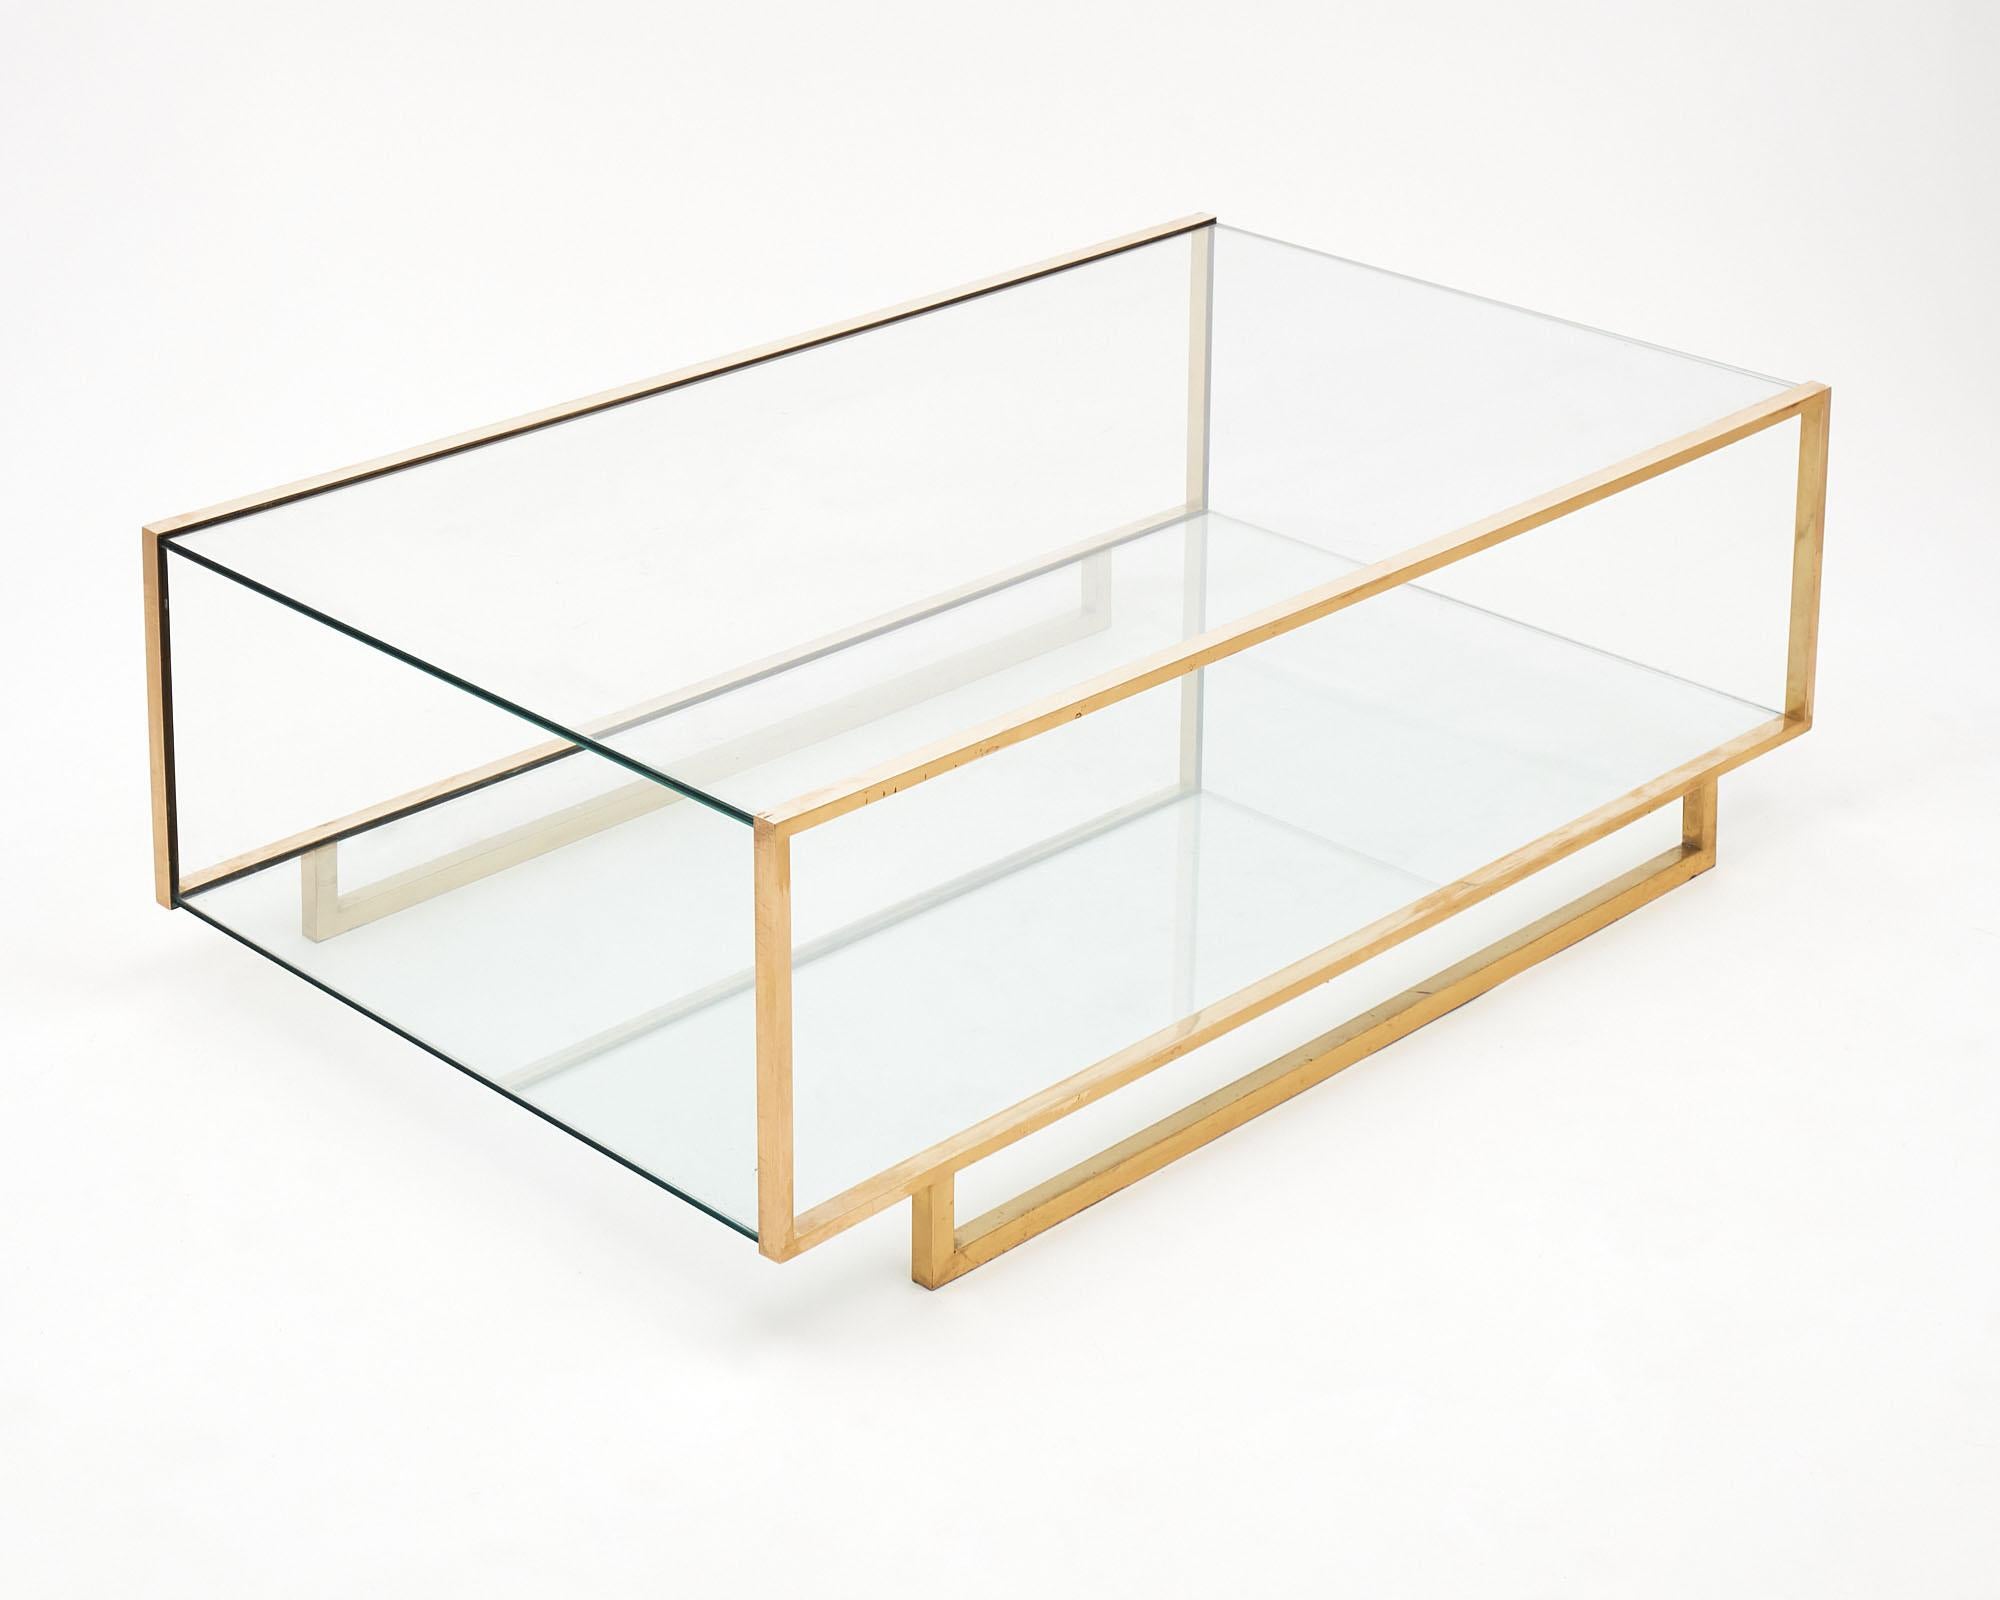 French coffee table made of brass and glass. There are two shelves of glass with glass on each end; creating a vitrine like case. We love the striking lines of this piece!